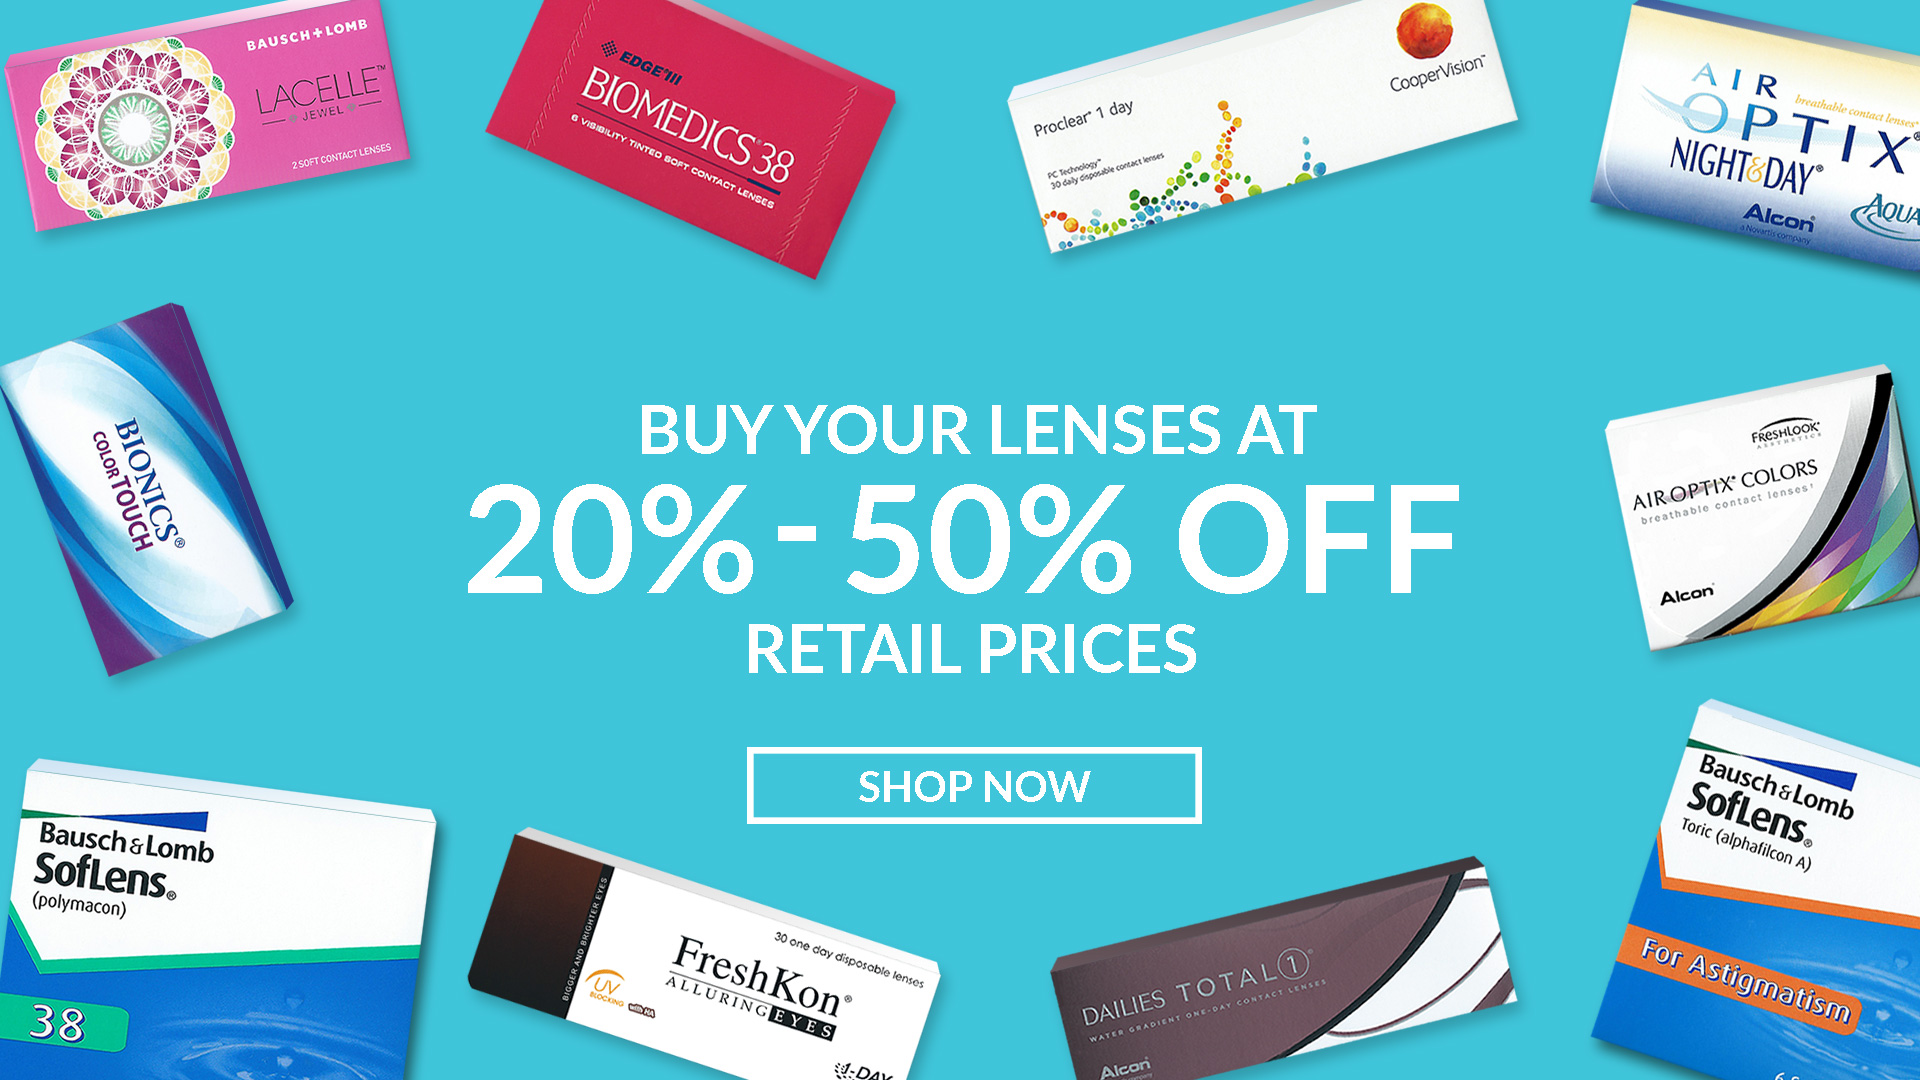 Buy your lenses at 20% - 50% off retail prices